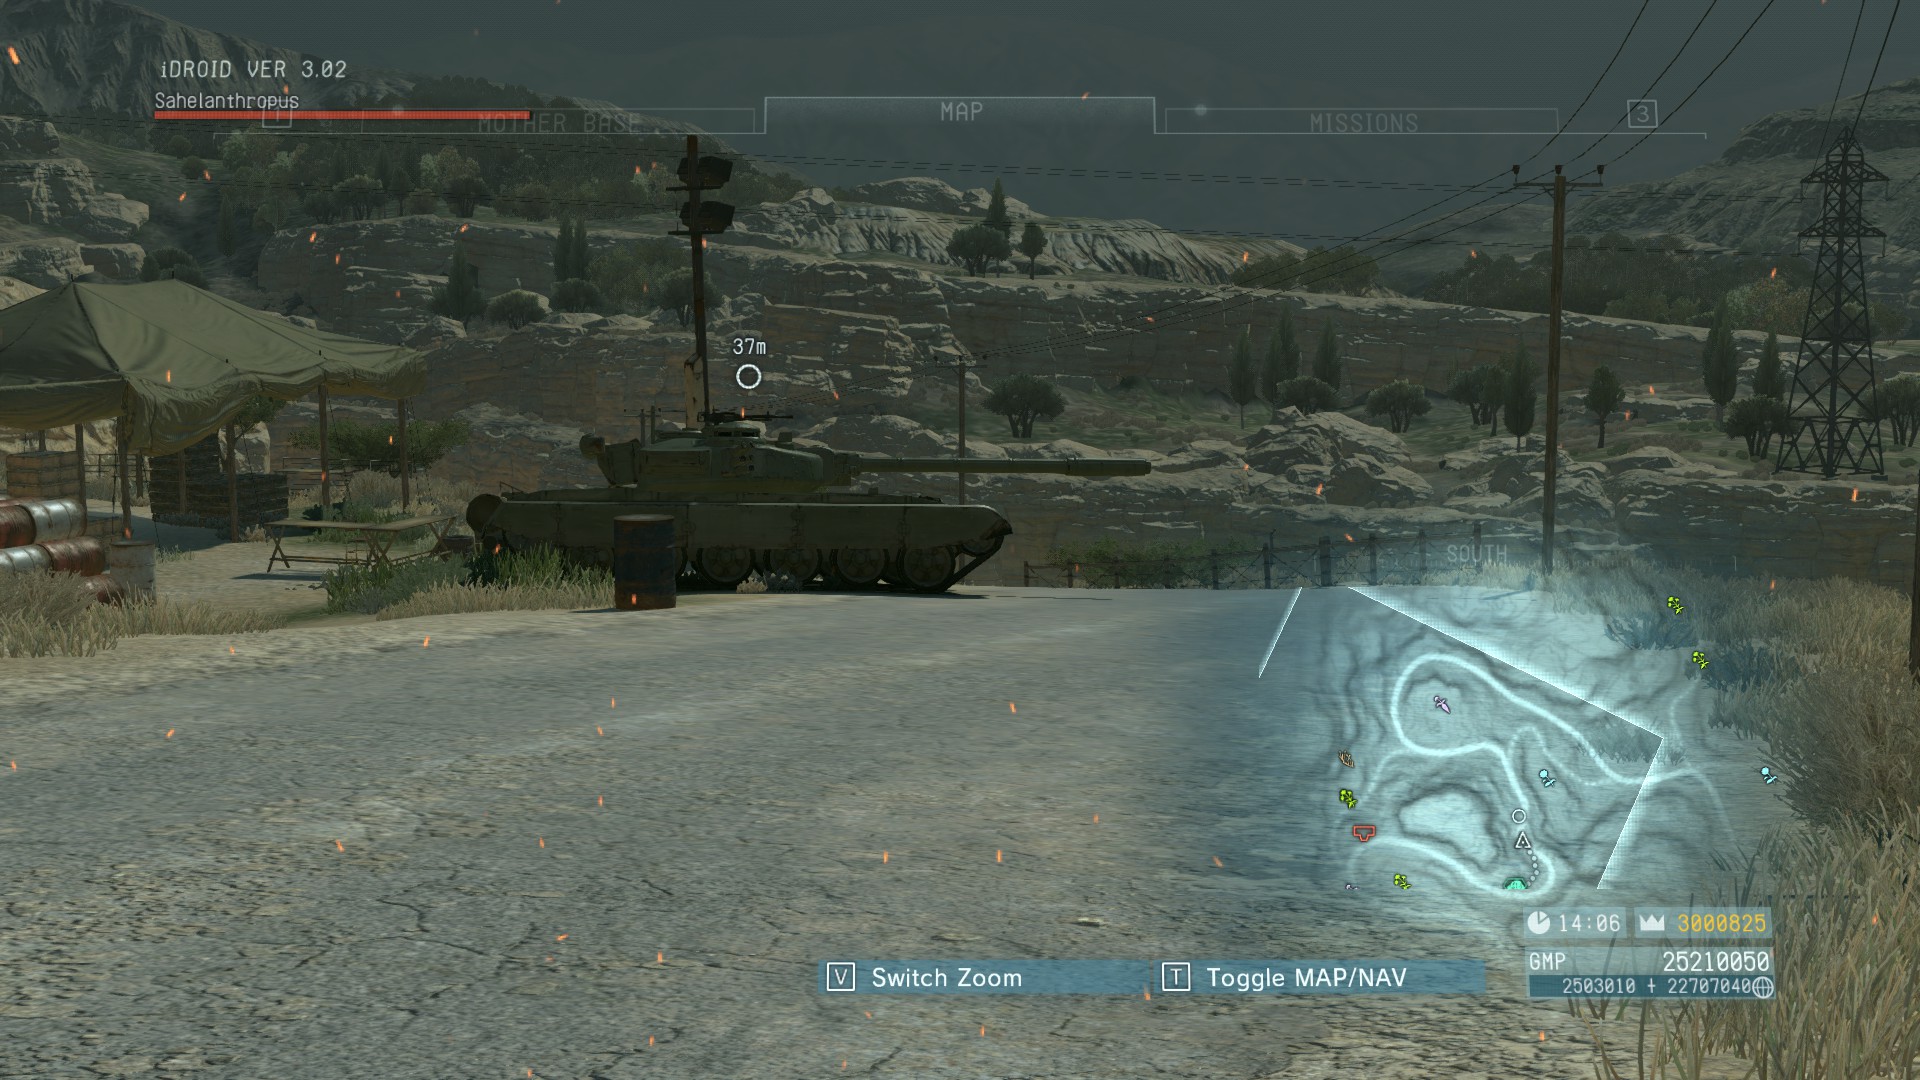 METAL GEAR SOLID V: THE PHANTOM PAIN - All Vehicles and Missions Guide - Sahelanthropus - 6027F59